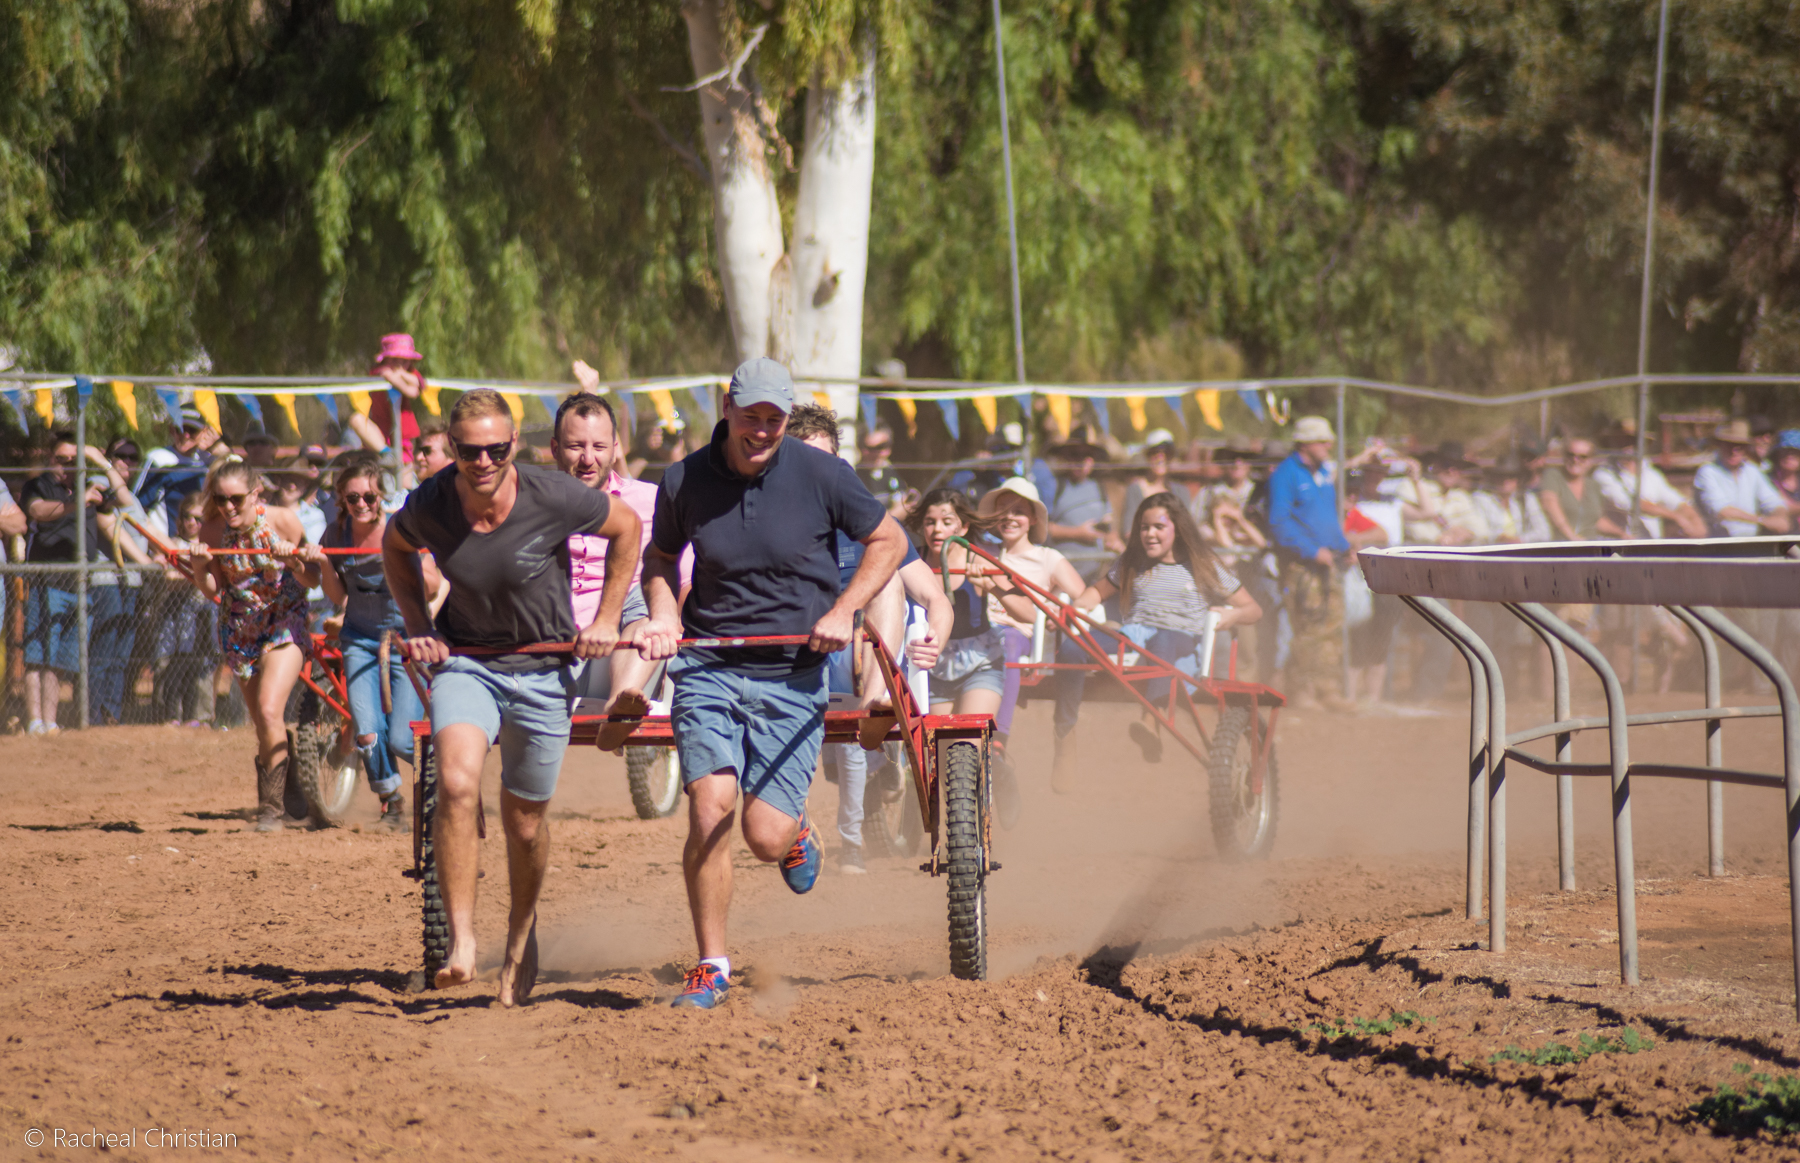 Alice Springs Camel Cup - Photography by Racheal Christian rachealchristainphotography.com